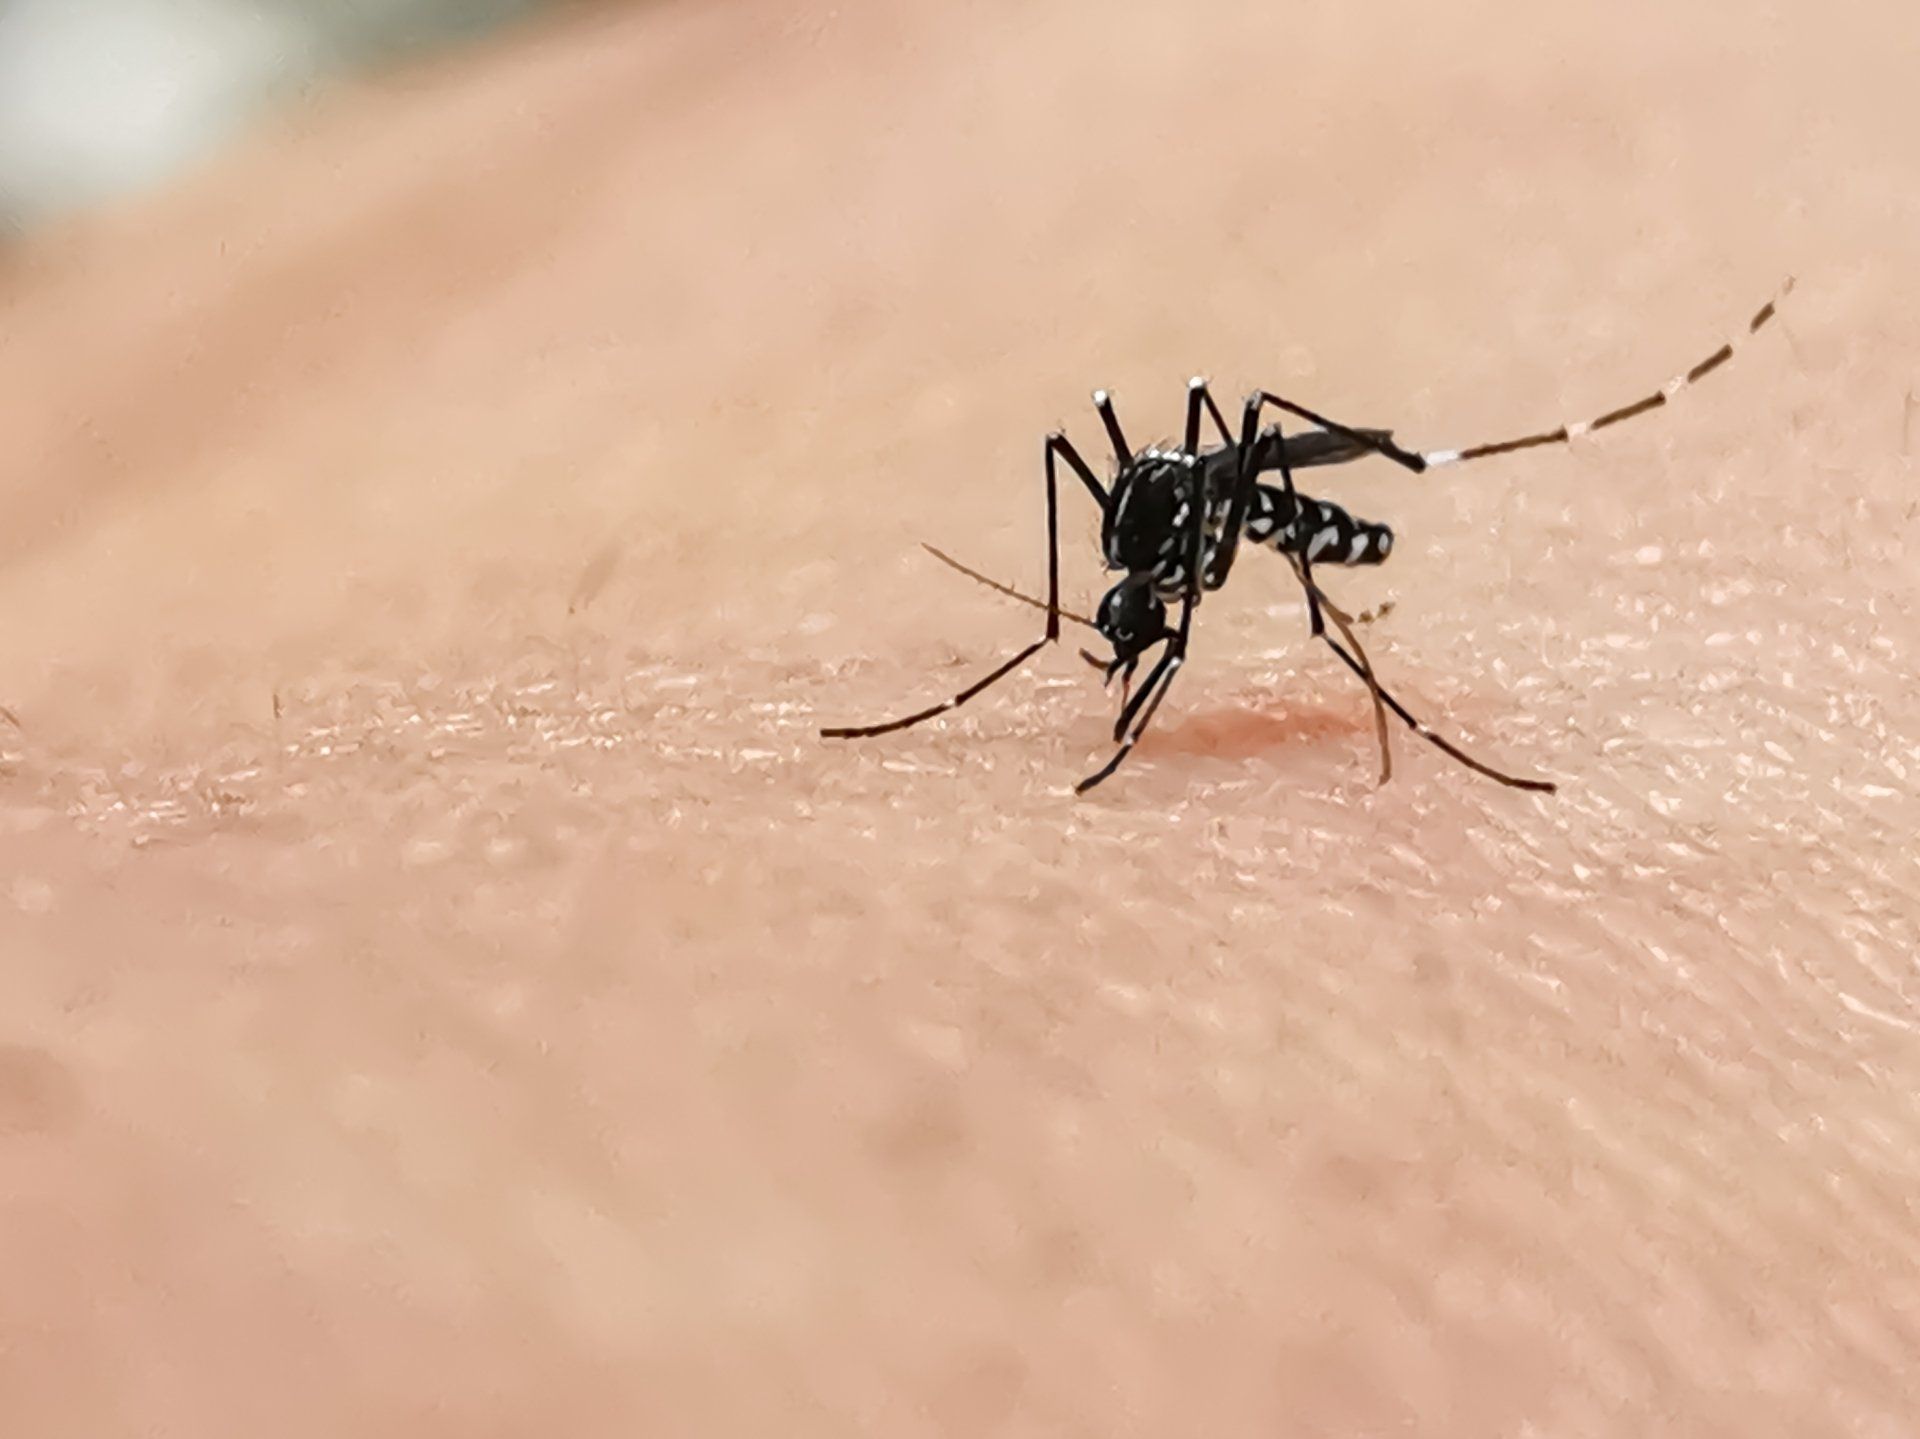 A mosquito sitting and sucking on a human skin